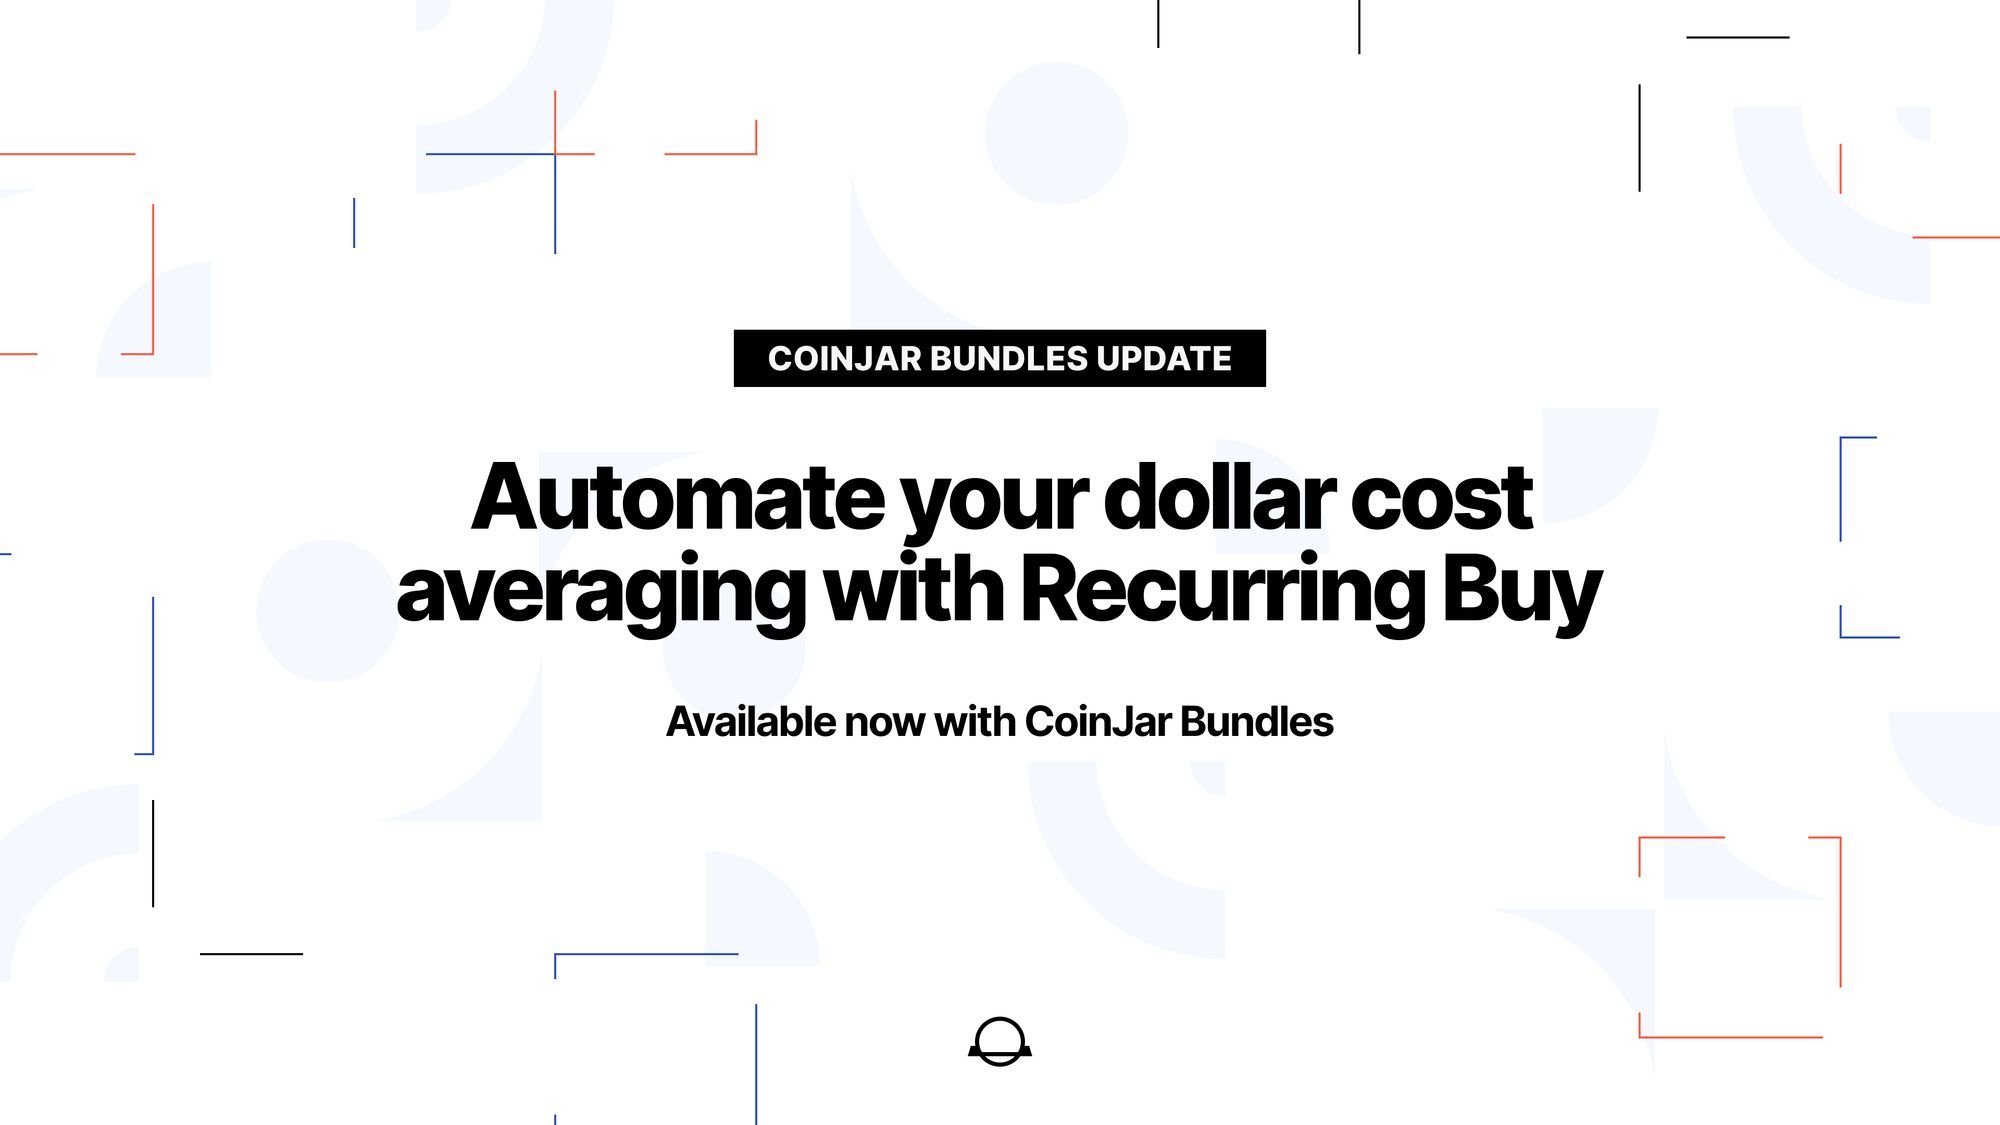 Recurring Buy (DCA) is now available on CoinJar!